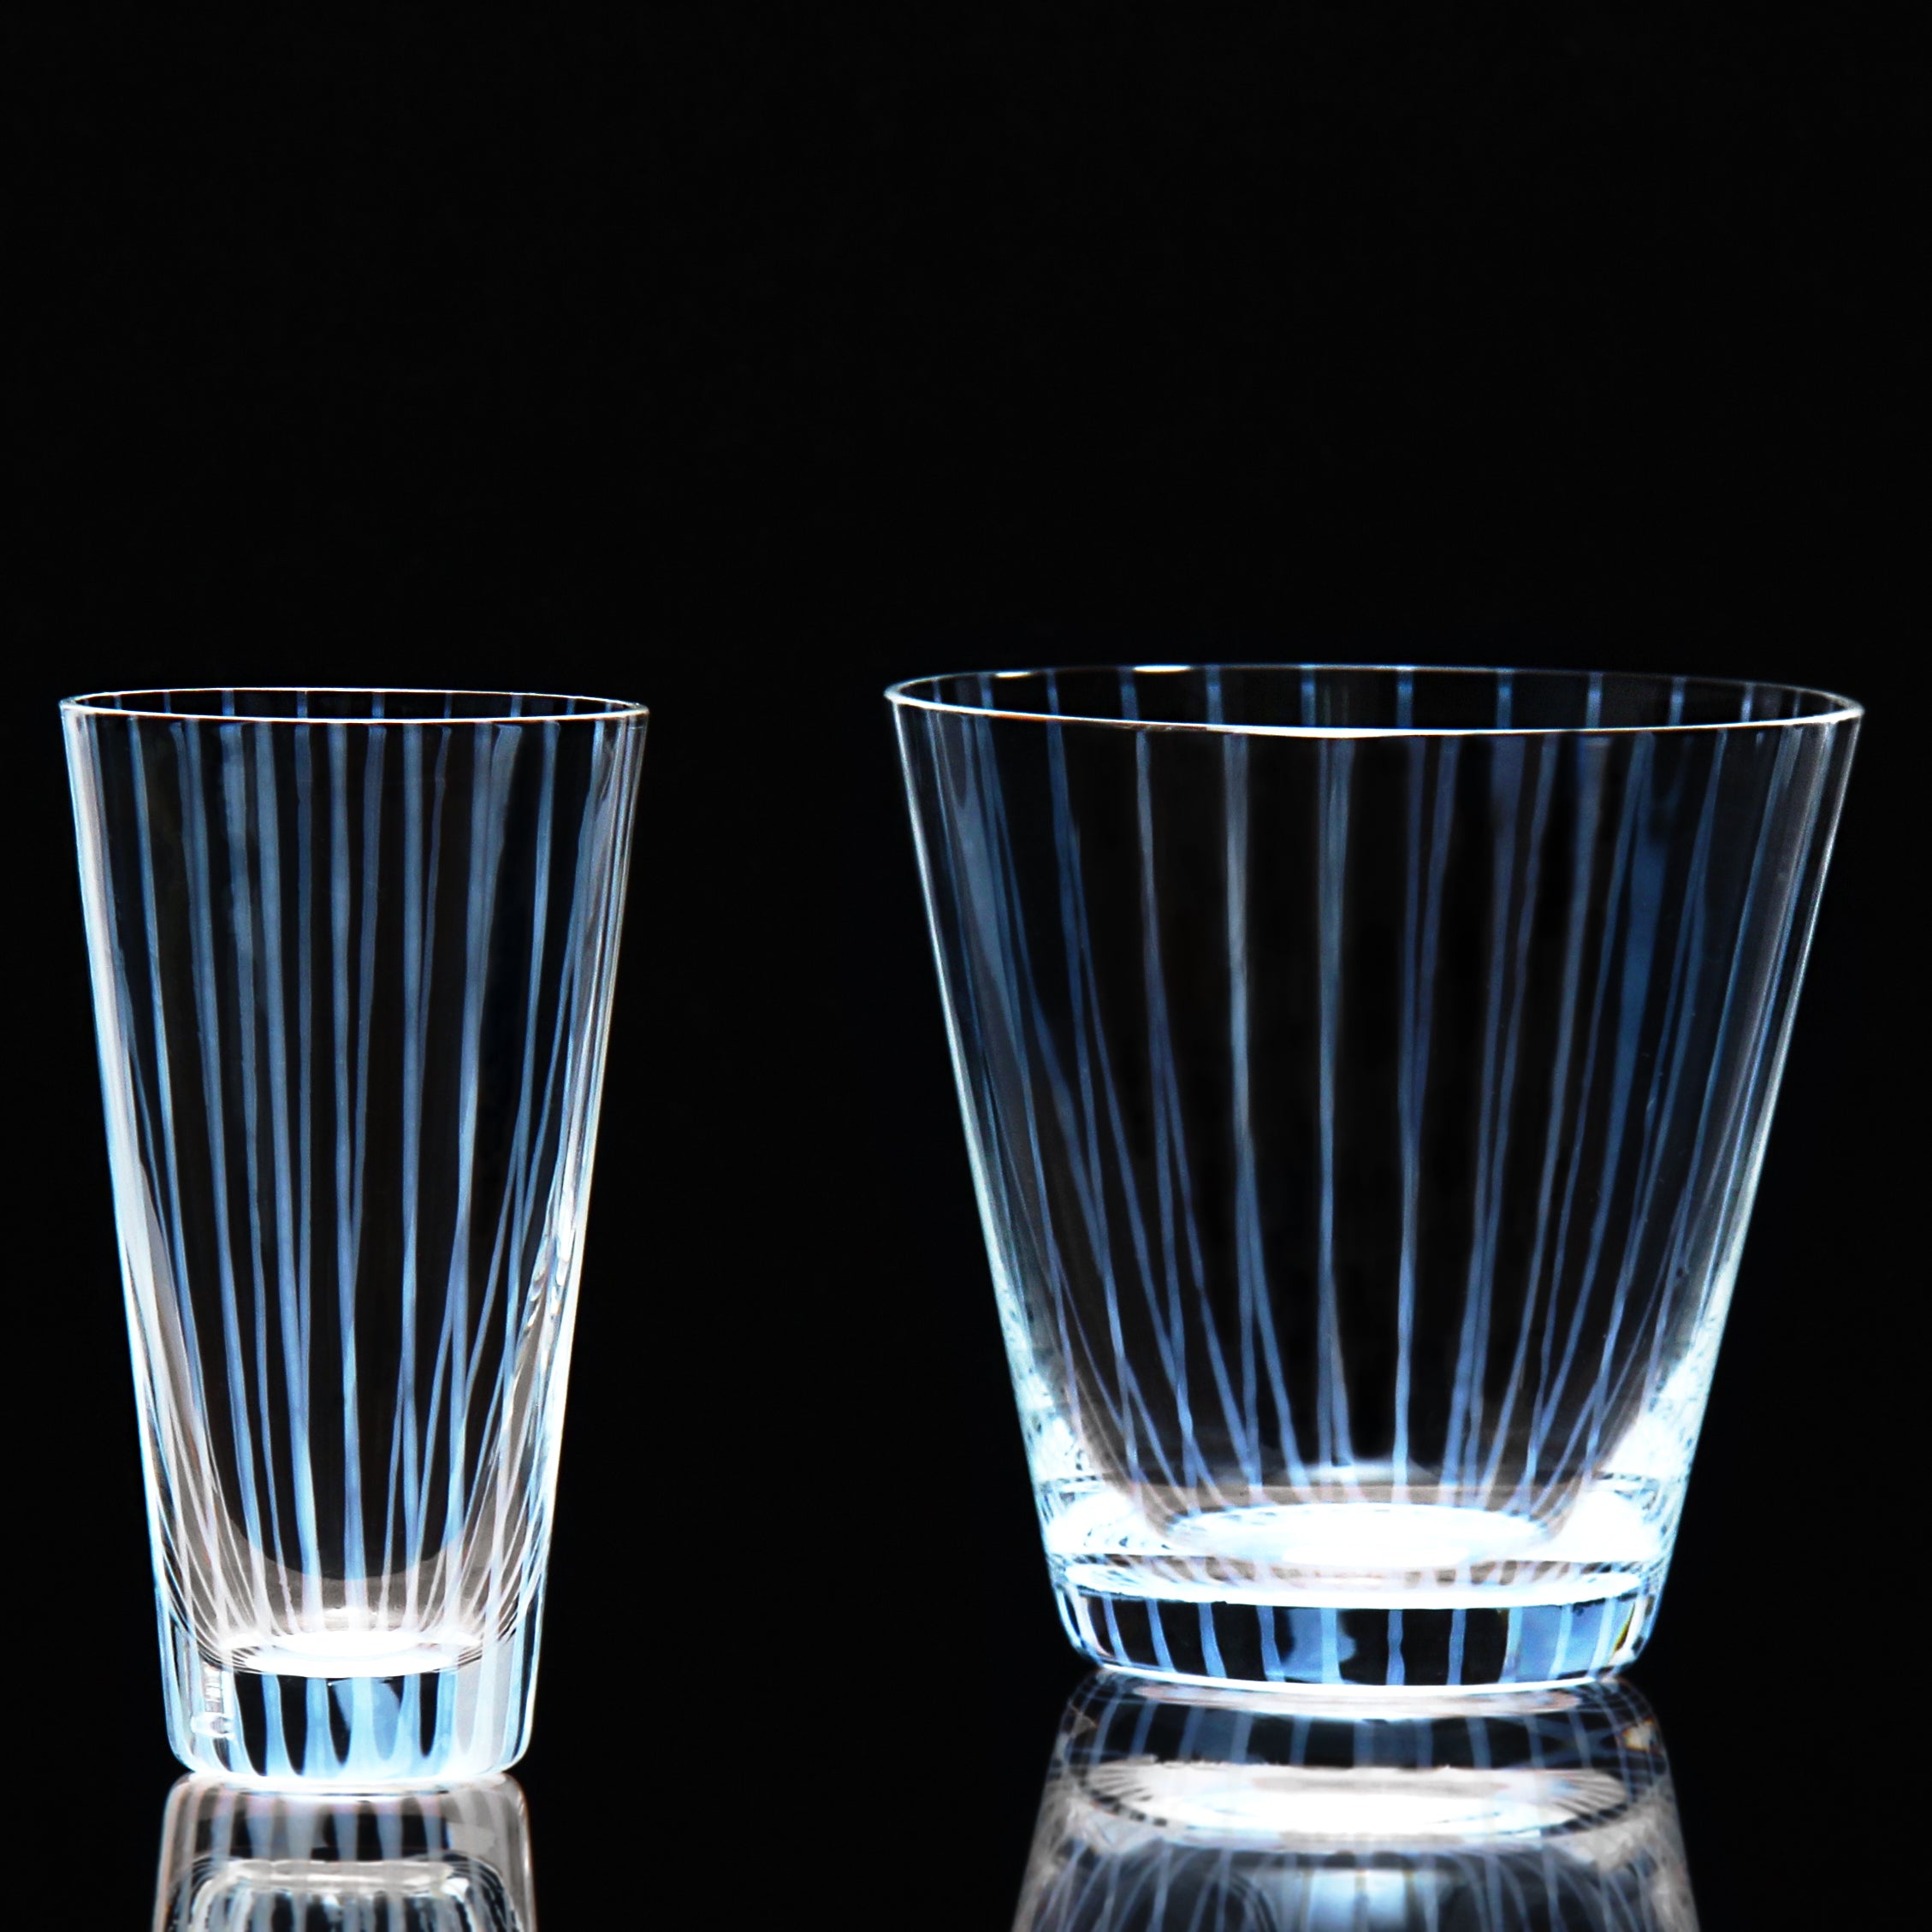 WINTER SALE 15% OFF - JAPANESE STRIPED SIPPING GLASS